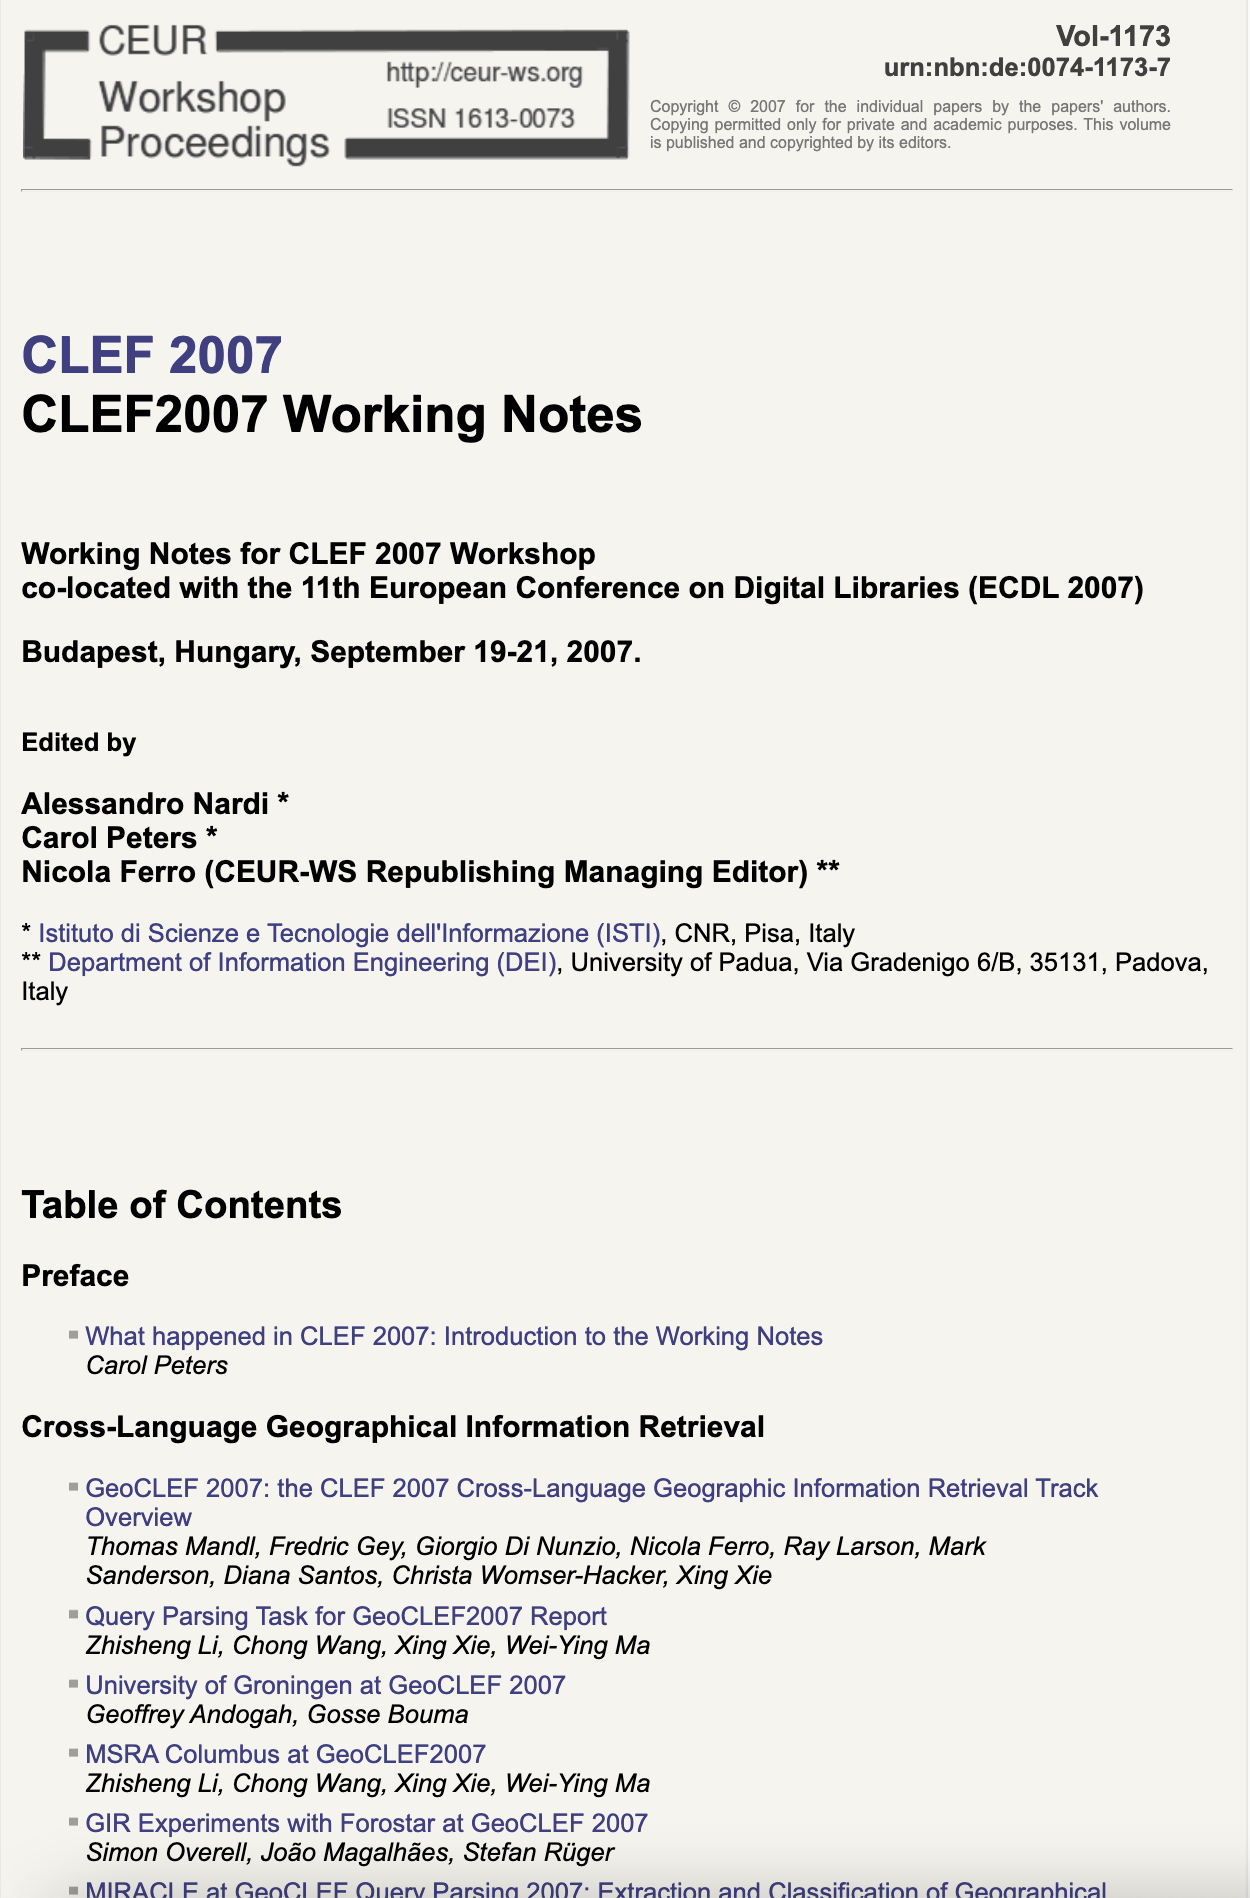 CLEF 2007 CEUR-WS Working Notes page